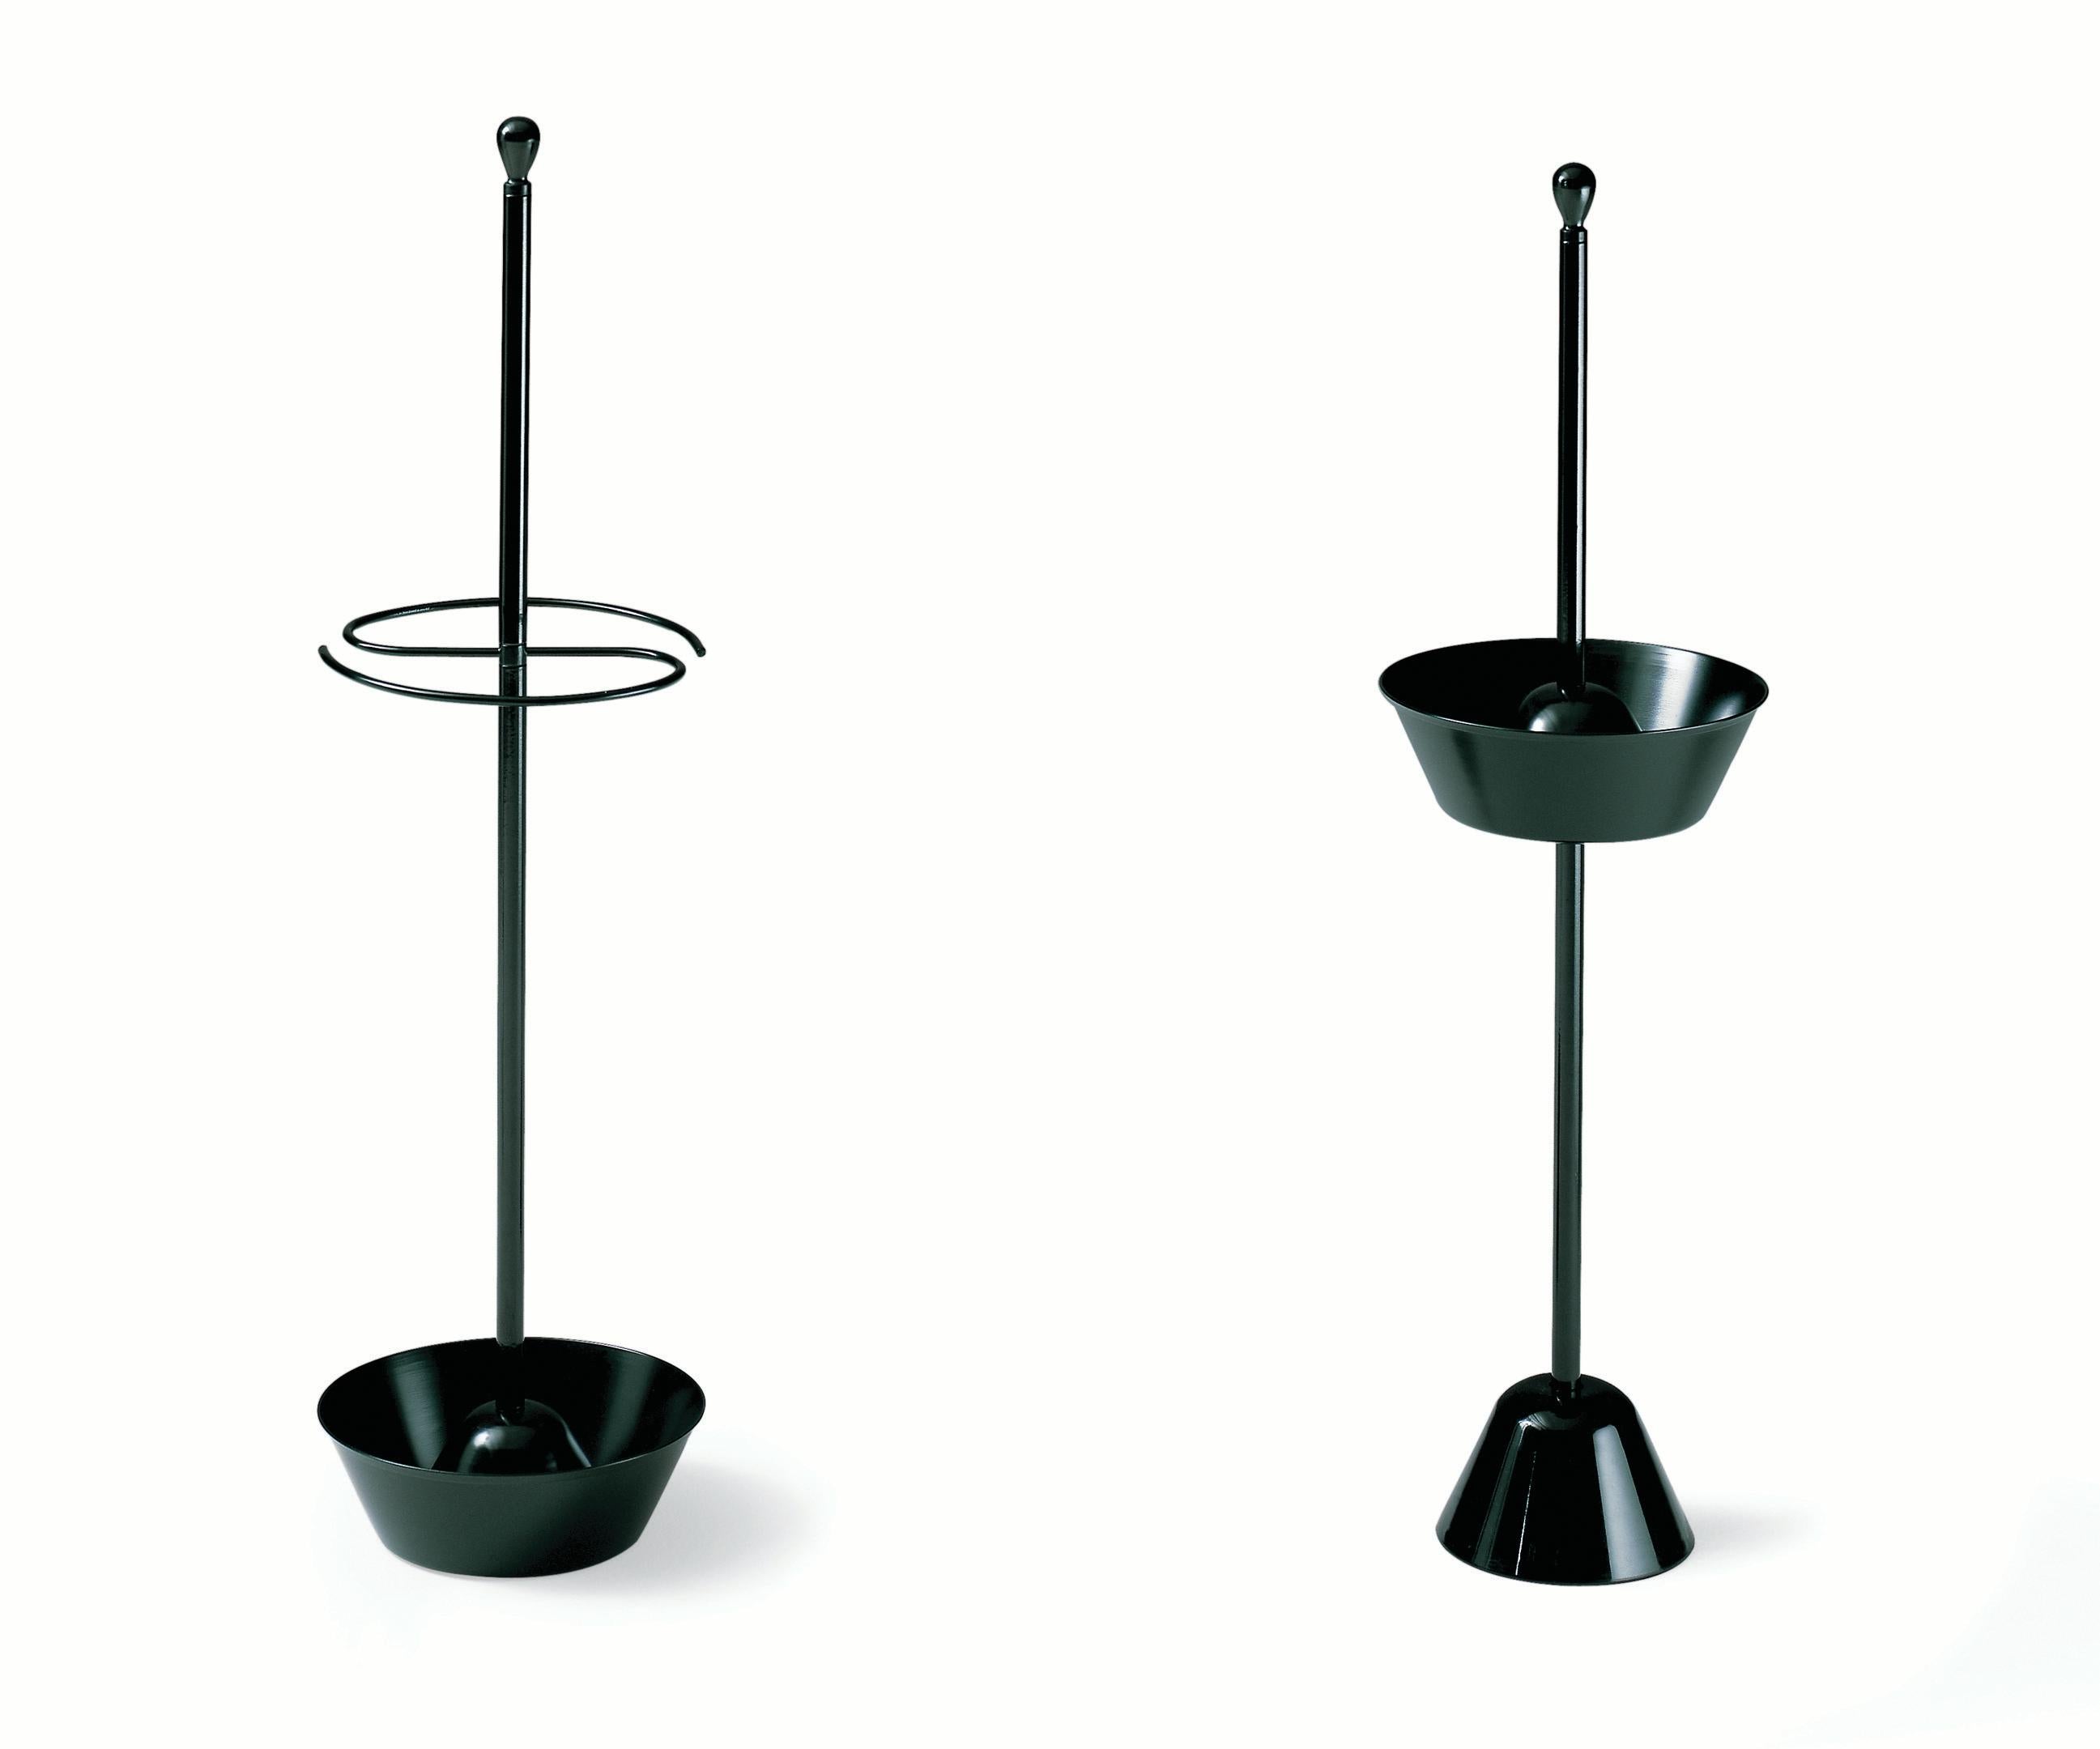 Zanotta Servofumo High Ashtray in Steel by Achille and Pier Giacomo Castiglioni

Base in black painted polypropylene. Steel support rod and aluminium sand container, black painted for outdoors . The ashtray has a black colour painted steel